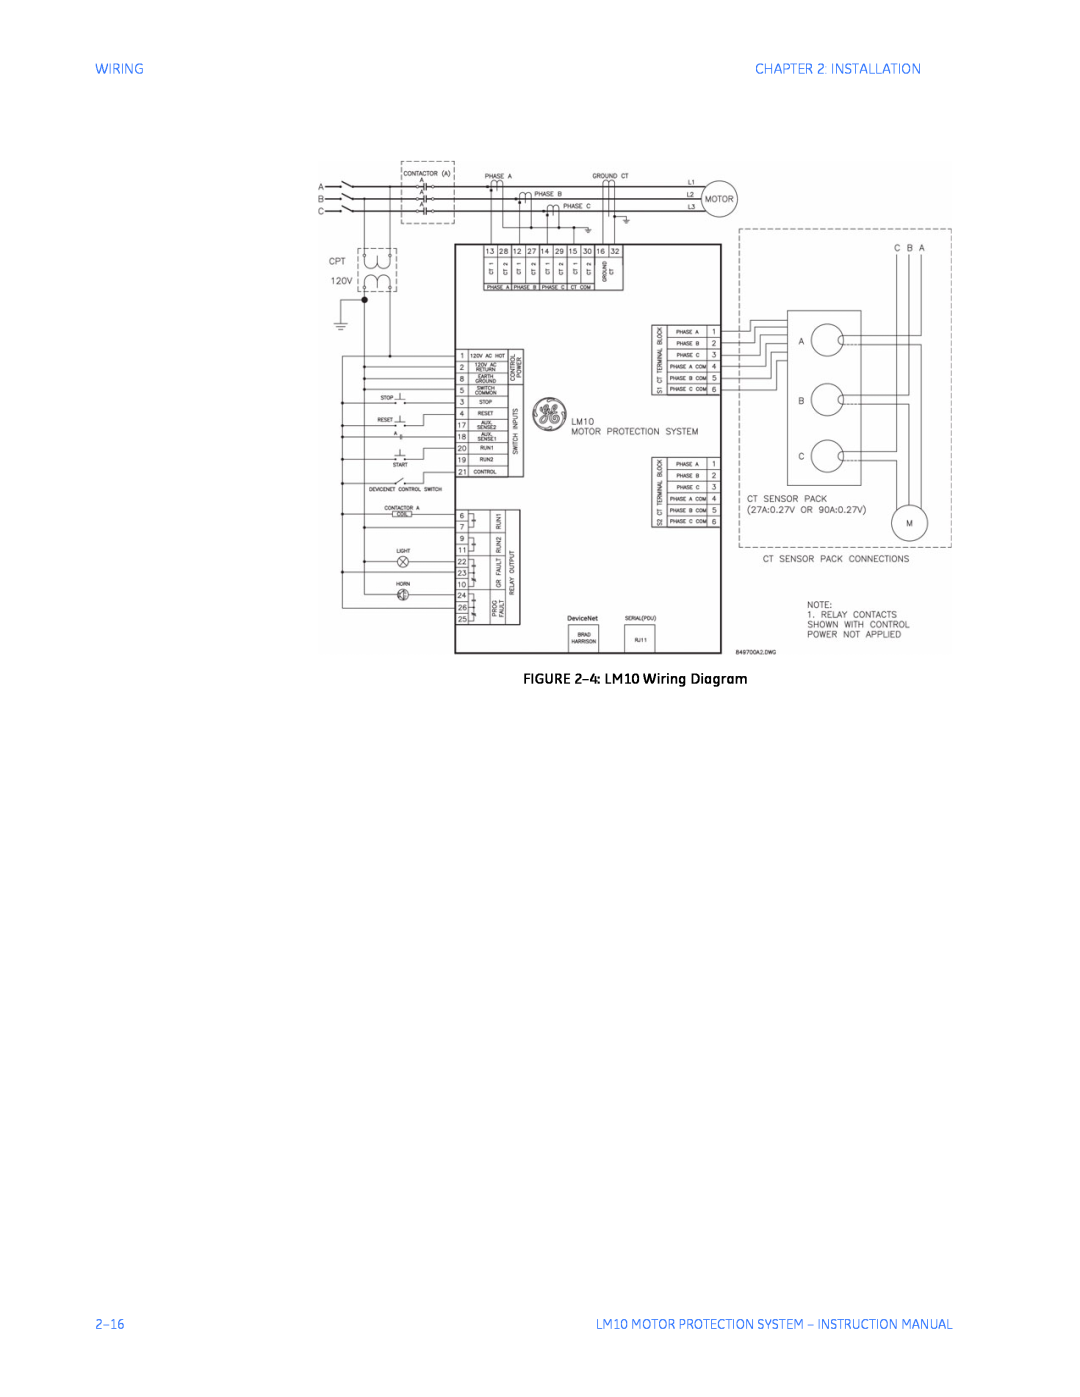 GE Motor Protection System 4 LM10 Wiring Diagram, Installation, LM10 MOTOR PROTECTION SYSTEM - INSTRUCTION MANUAL 